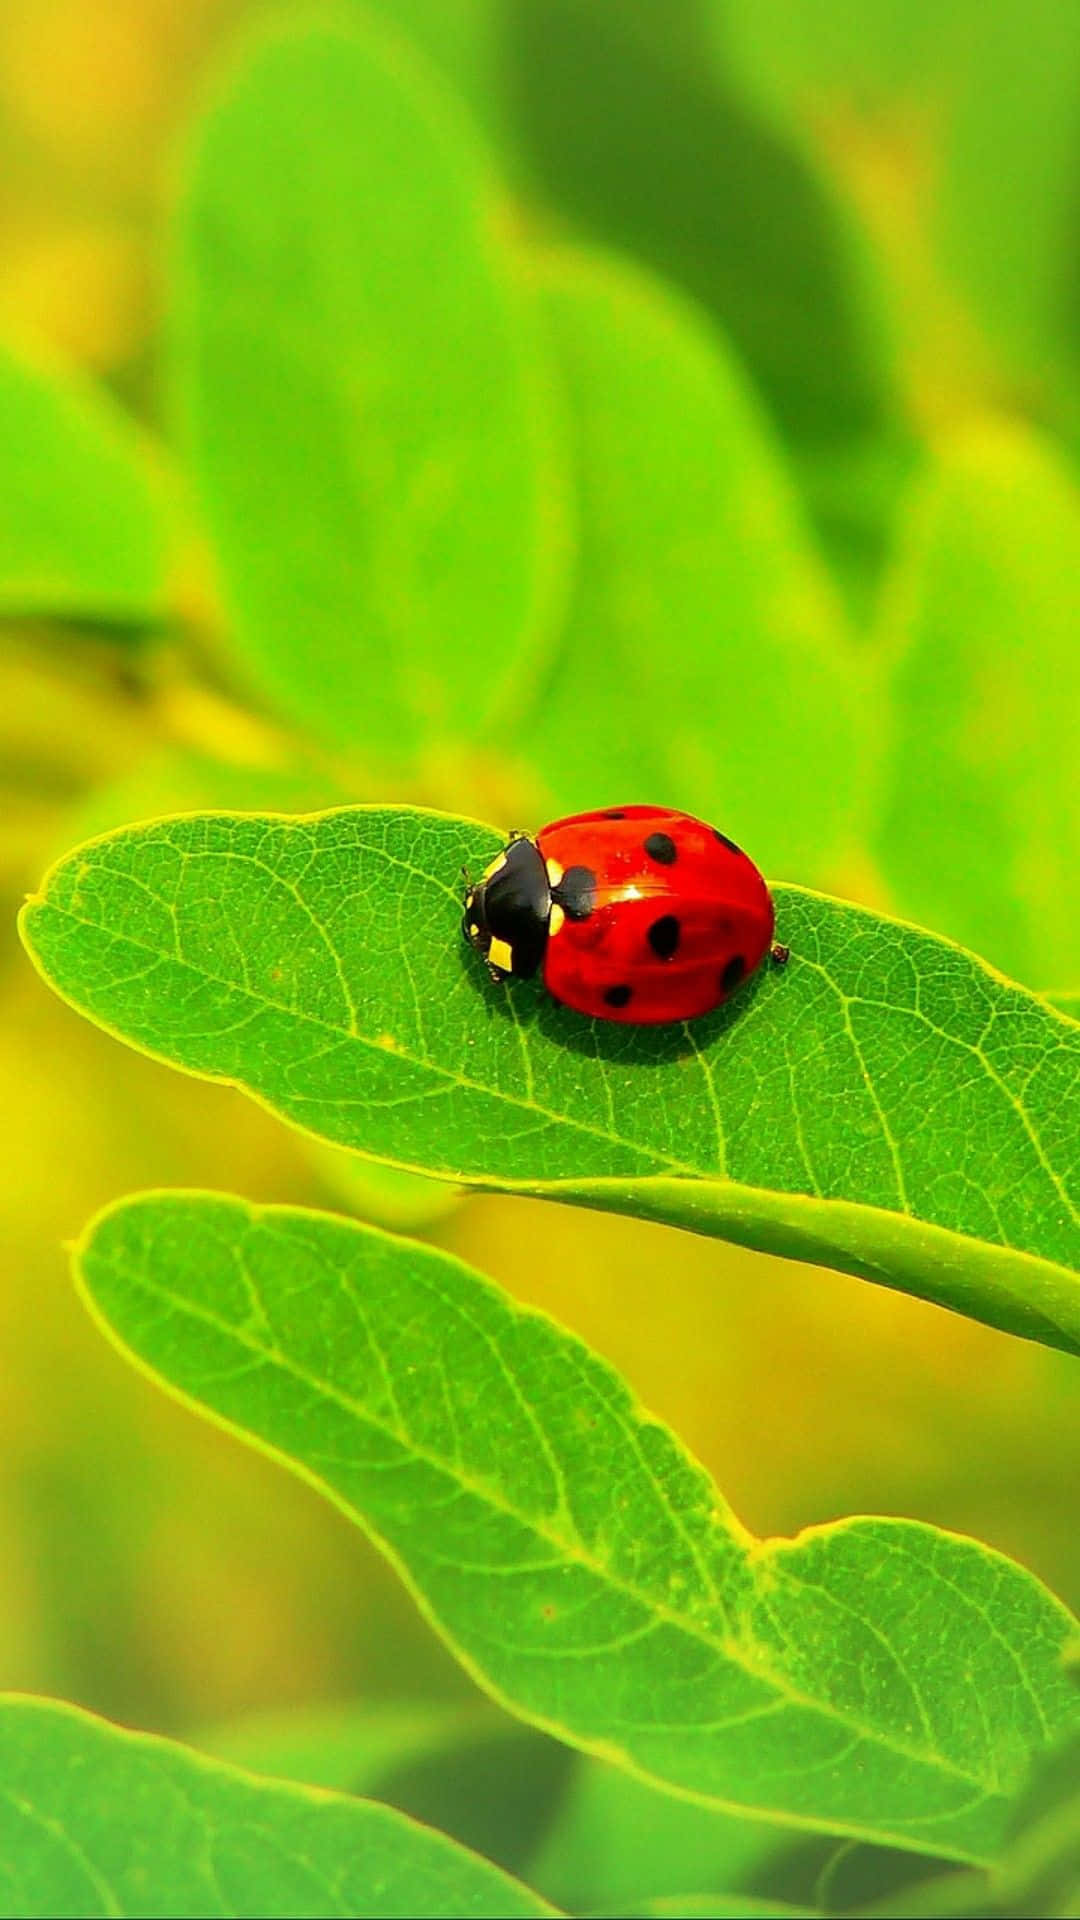 A Lively Red Ladybug Adorns This Iphone Wallpaper